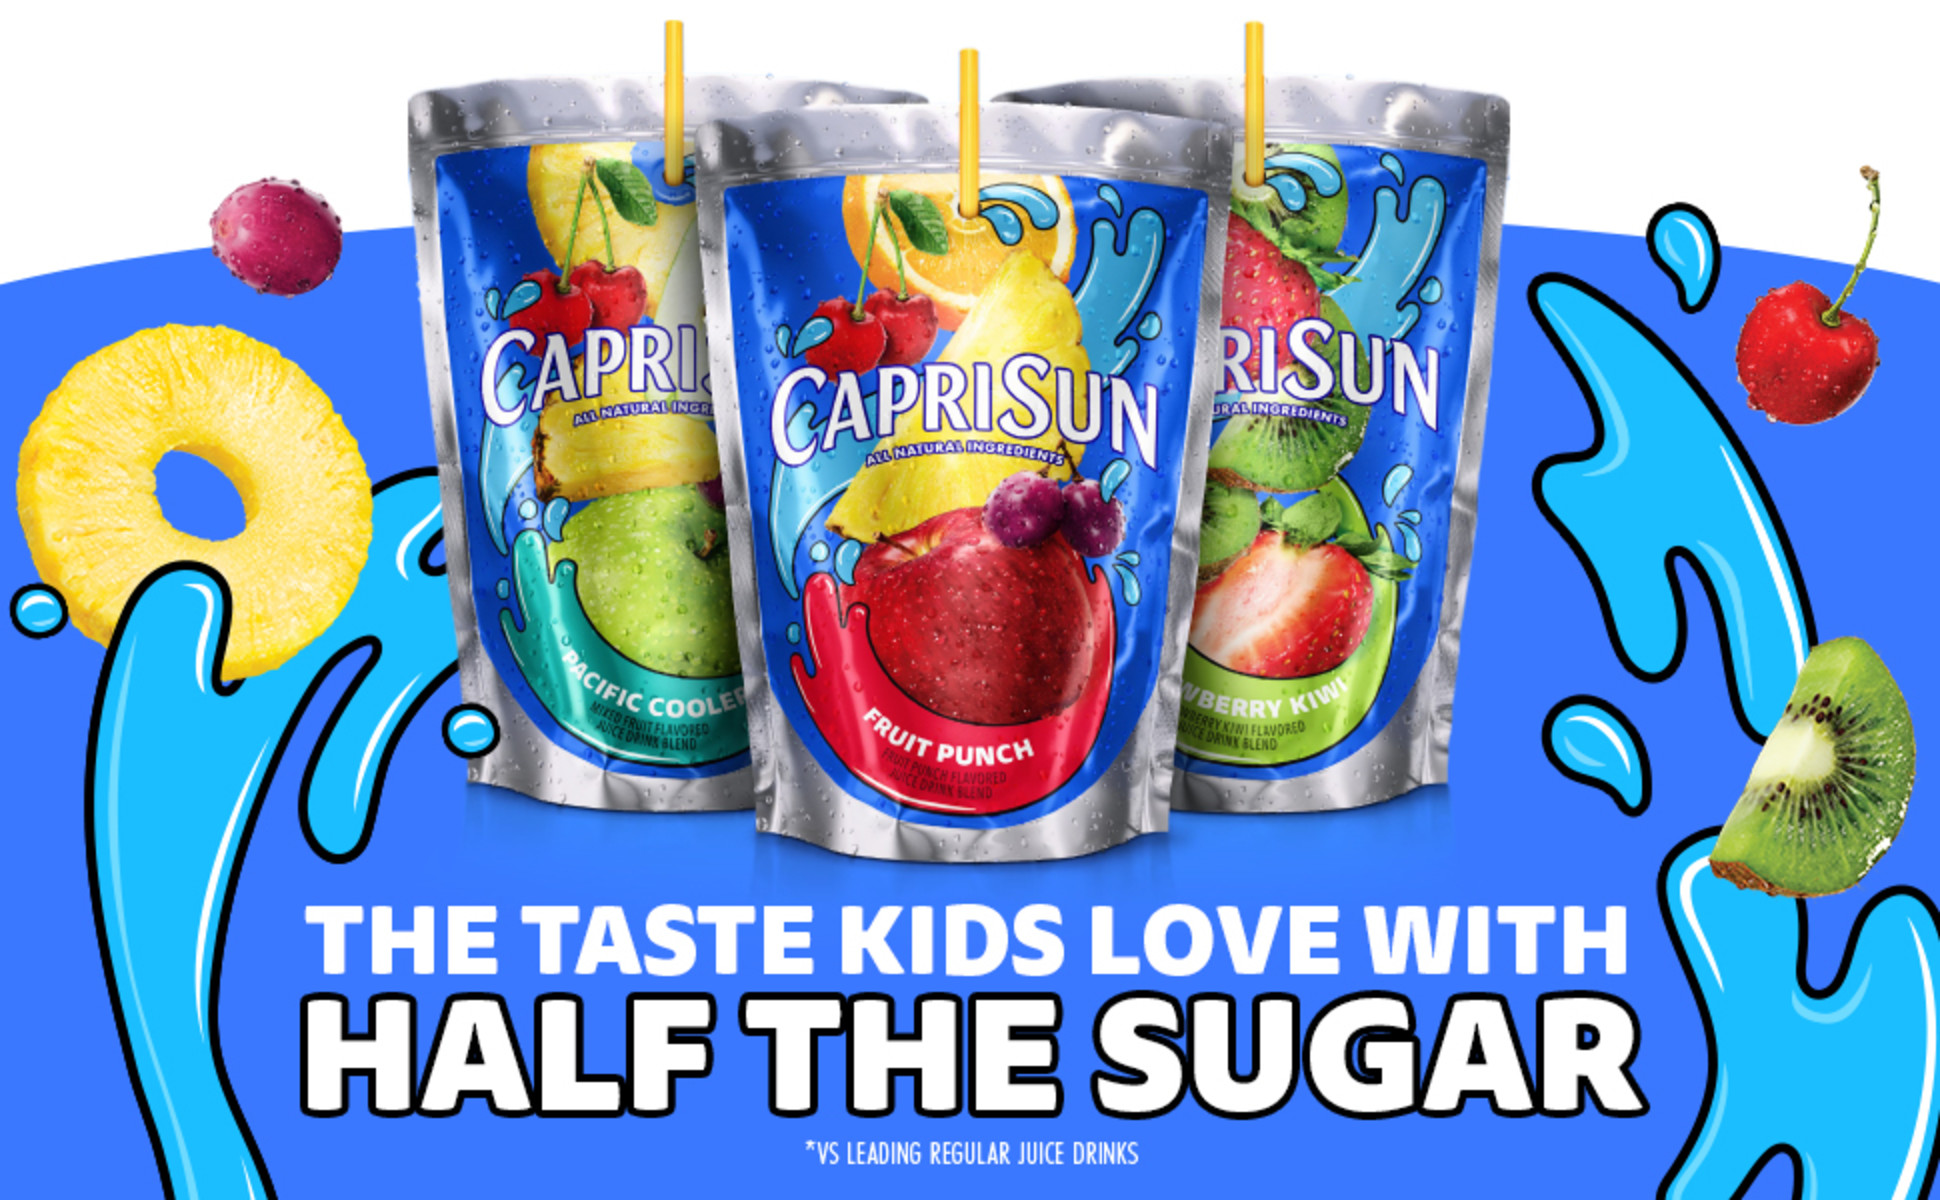 Capri Sun 100percent Juice Variety Pack Pack Of 40 Pouches - Office Depot